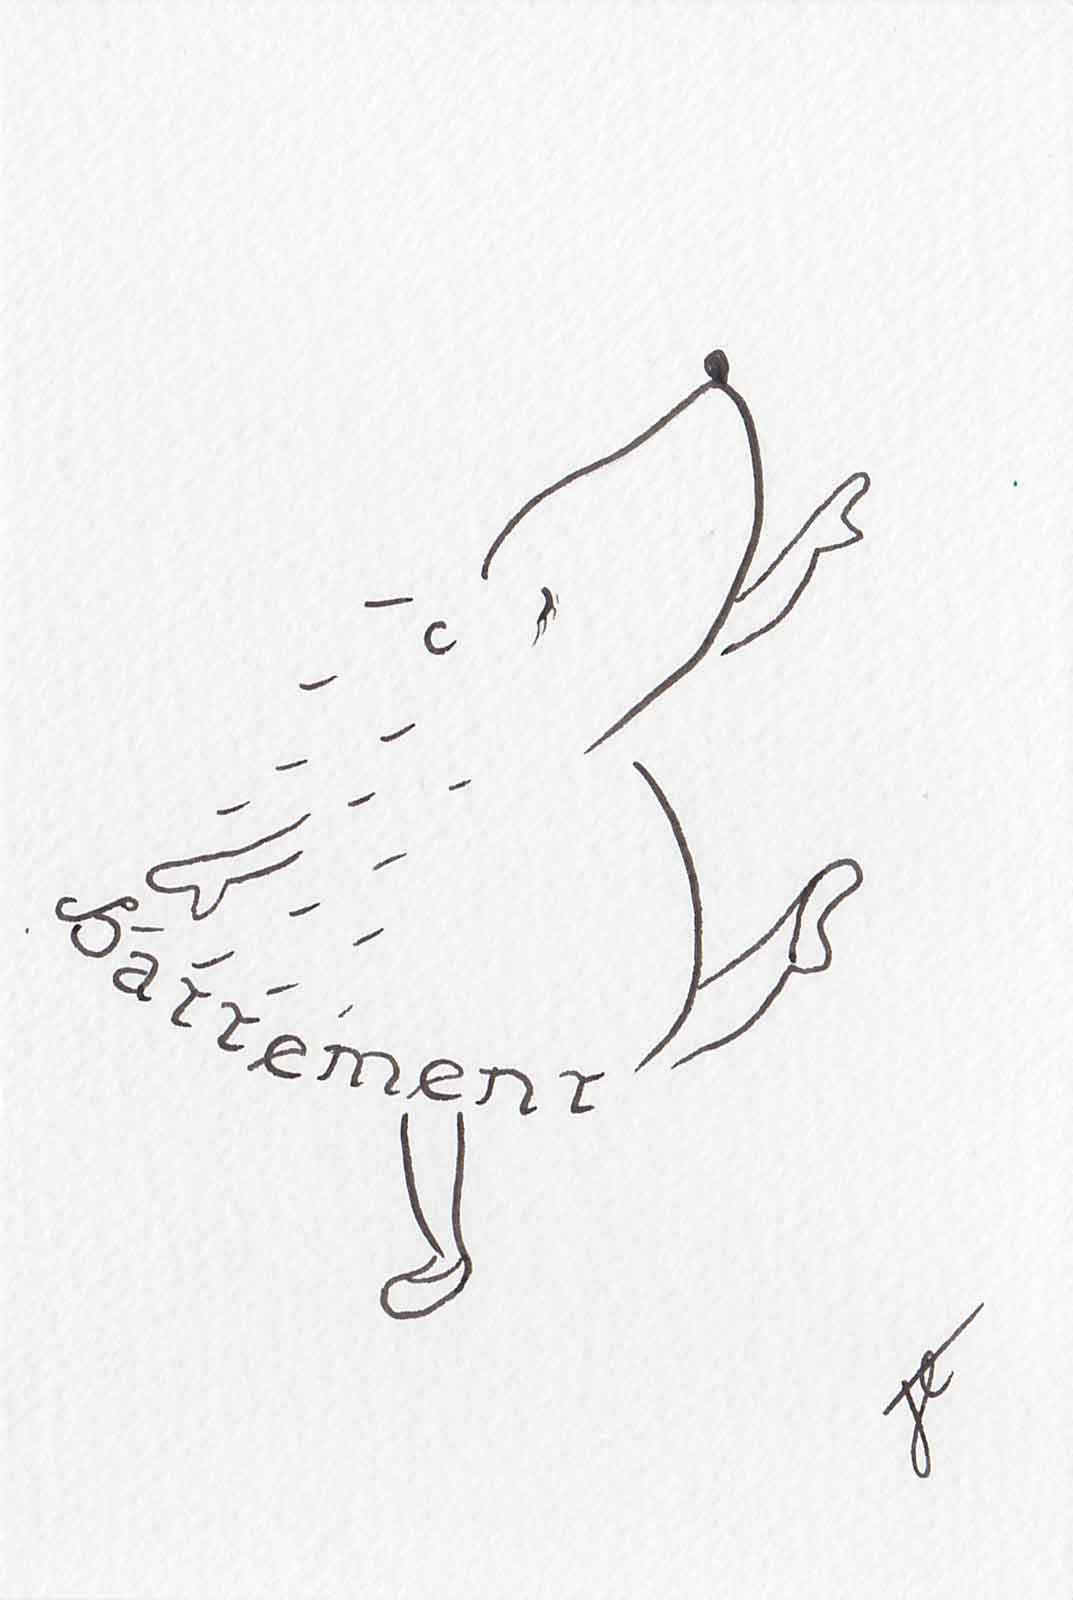 Hedgie ballettoons character in arabesque pose with handlettered battement tutu